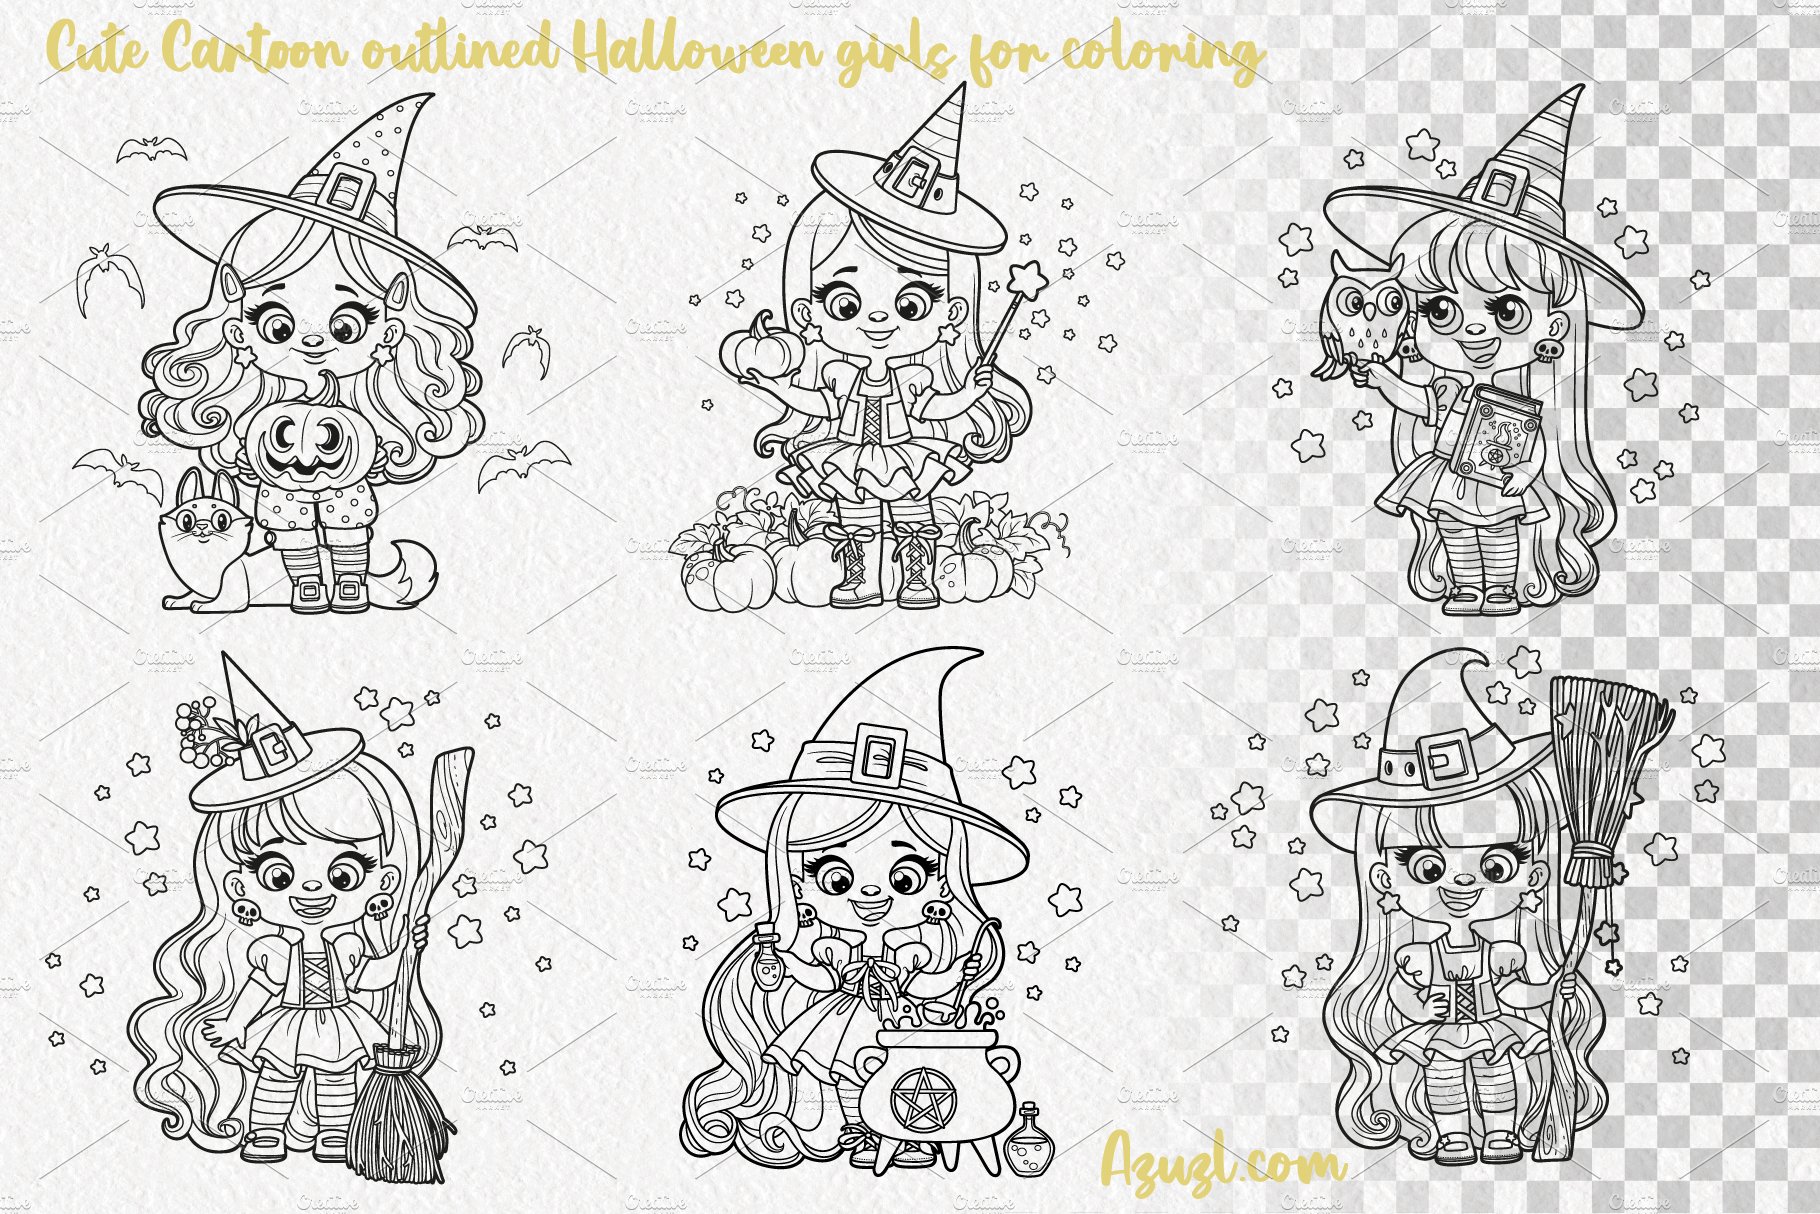 Cute cartoon Halloween witch girls preview image.